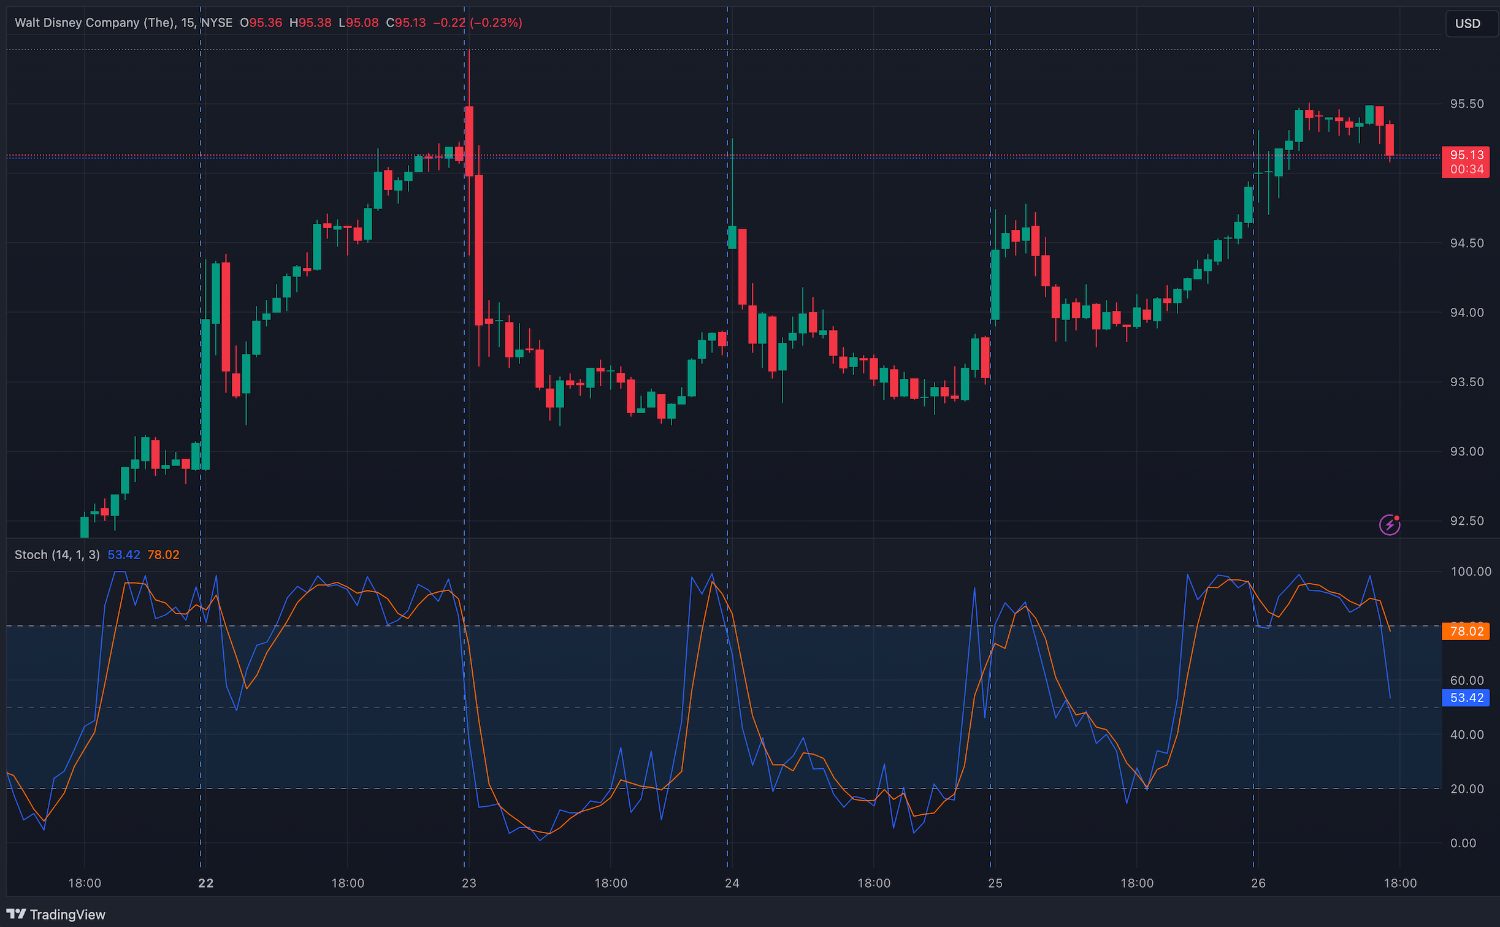 Using the Stochastic indicator on intraday trading chart